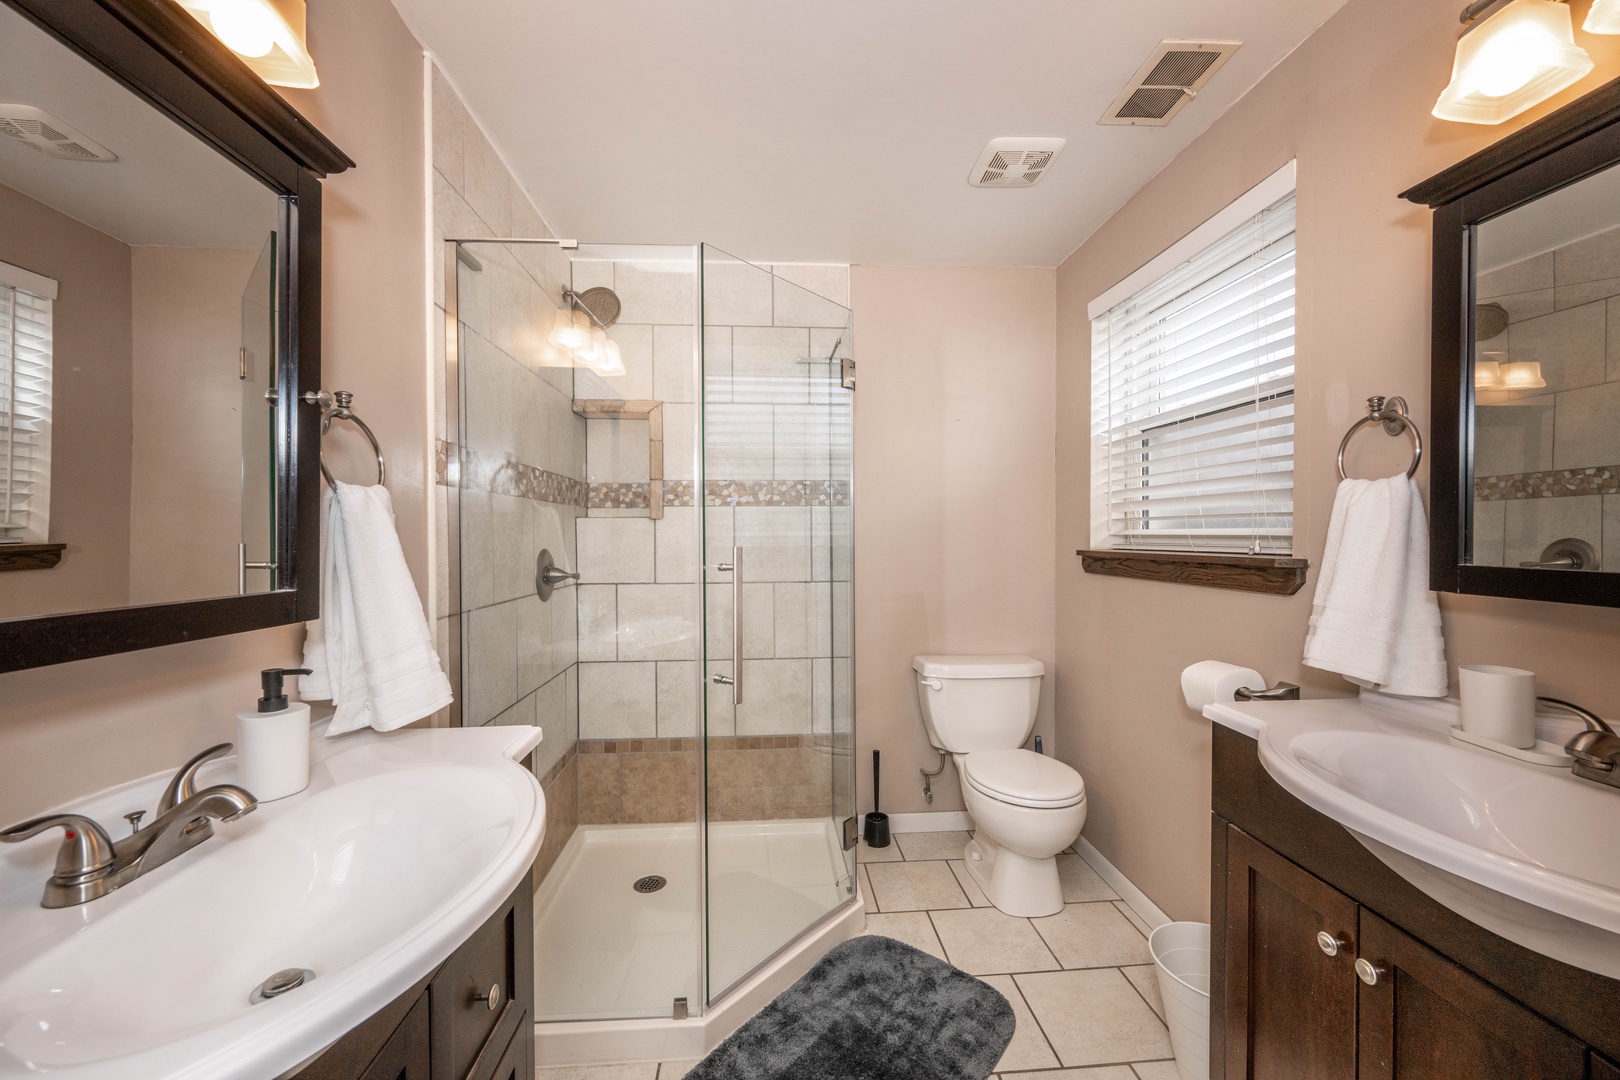 The master ensuite boasts dual vanities & a spa-like glass shower